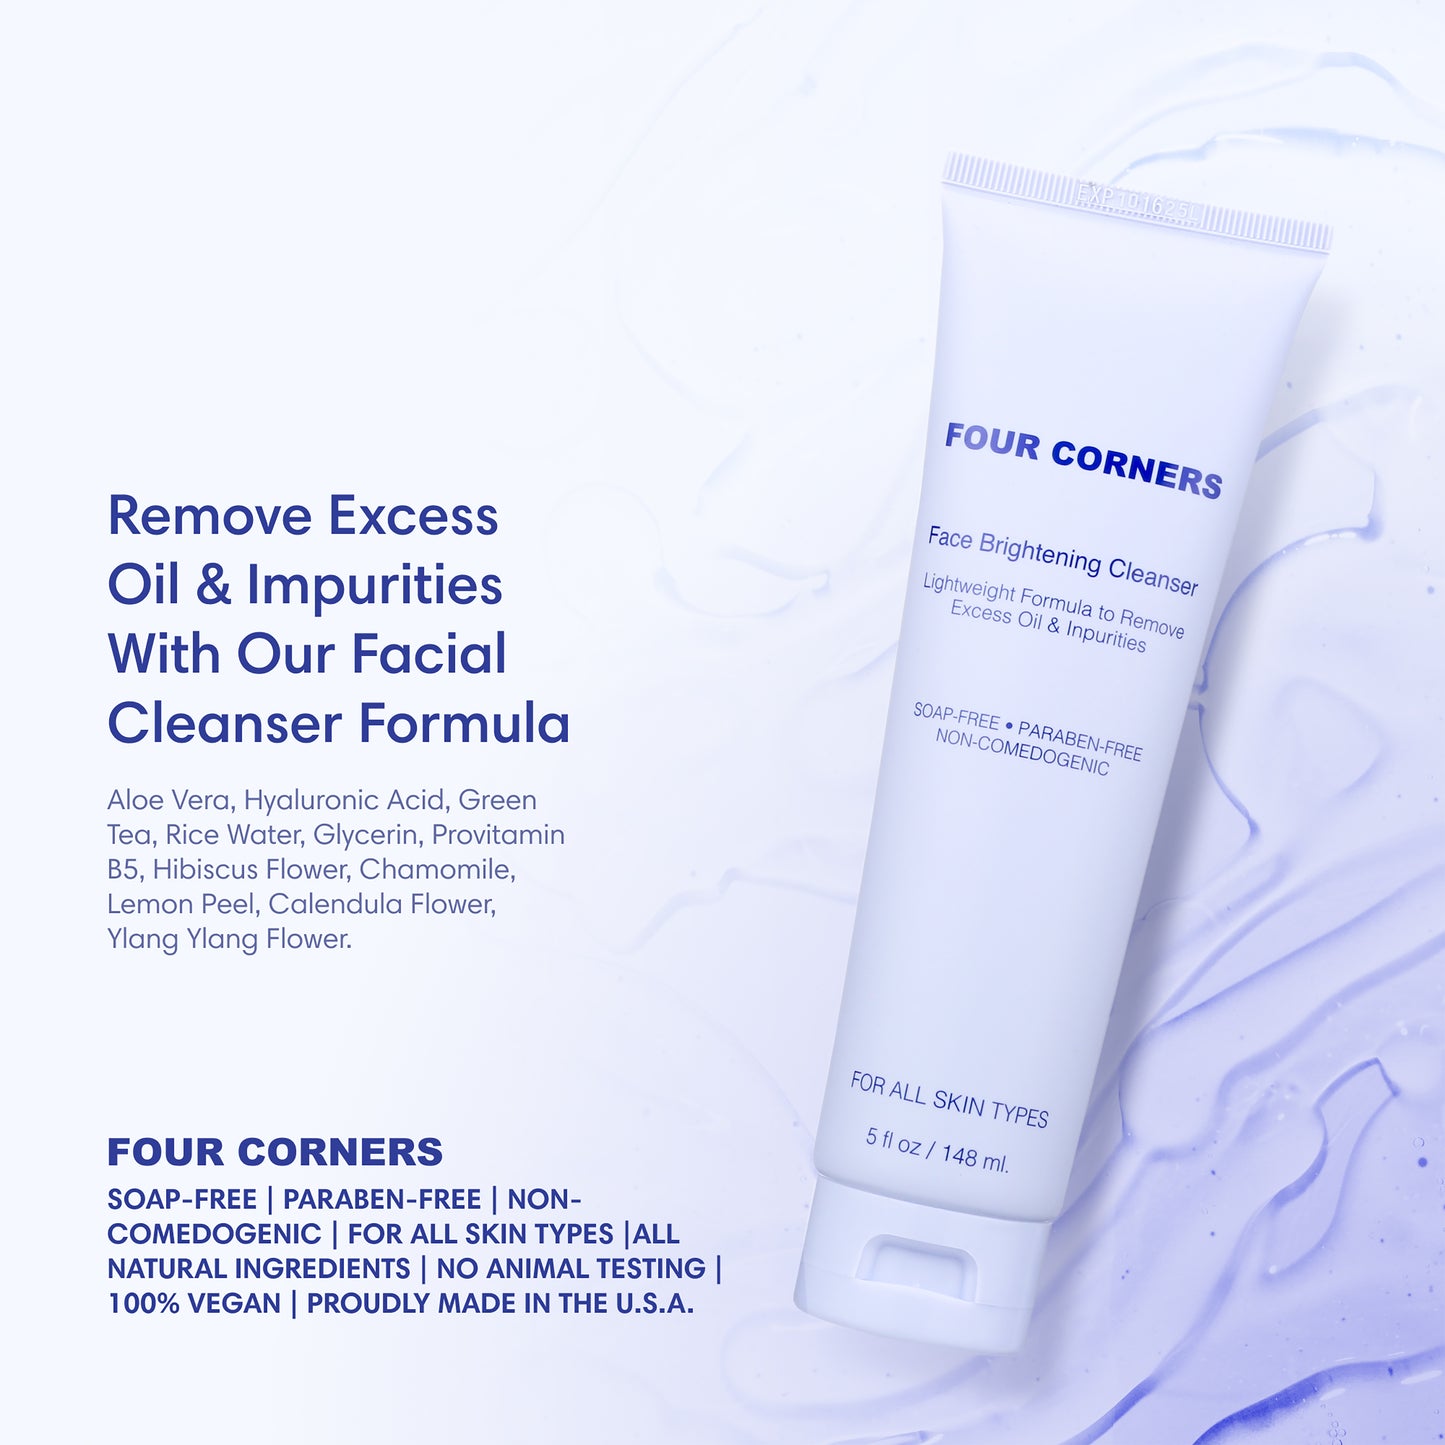 Face Brightening Cleanser Lightweight Formula to Remove Excess Oil & Impurities